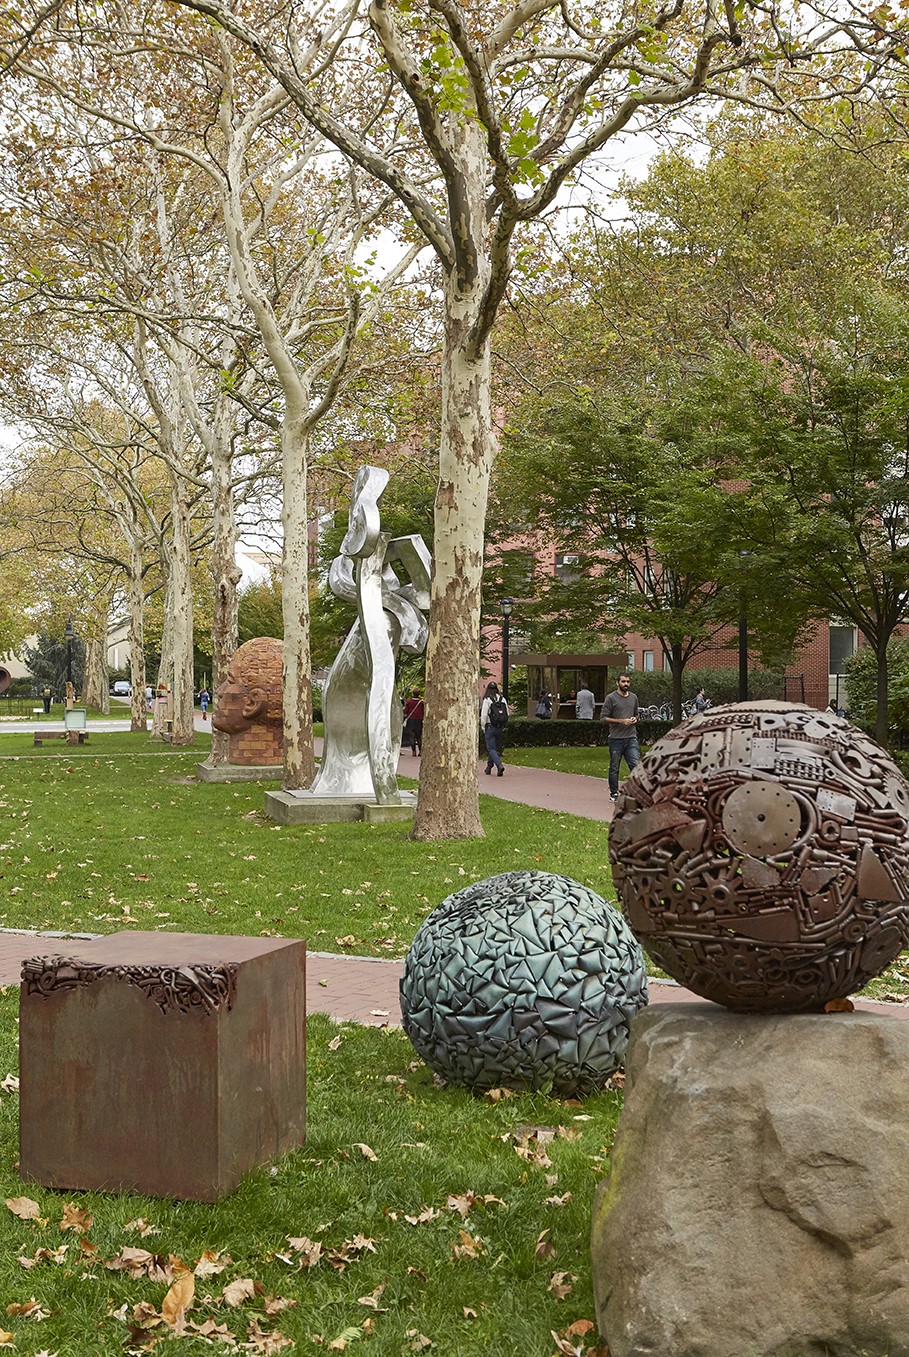 A number of sculptures in juxtaposition, including, on the far right, a work by Michael Malpass.